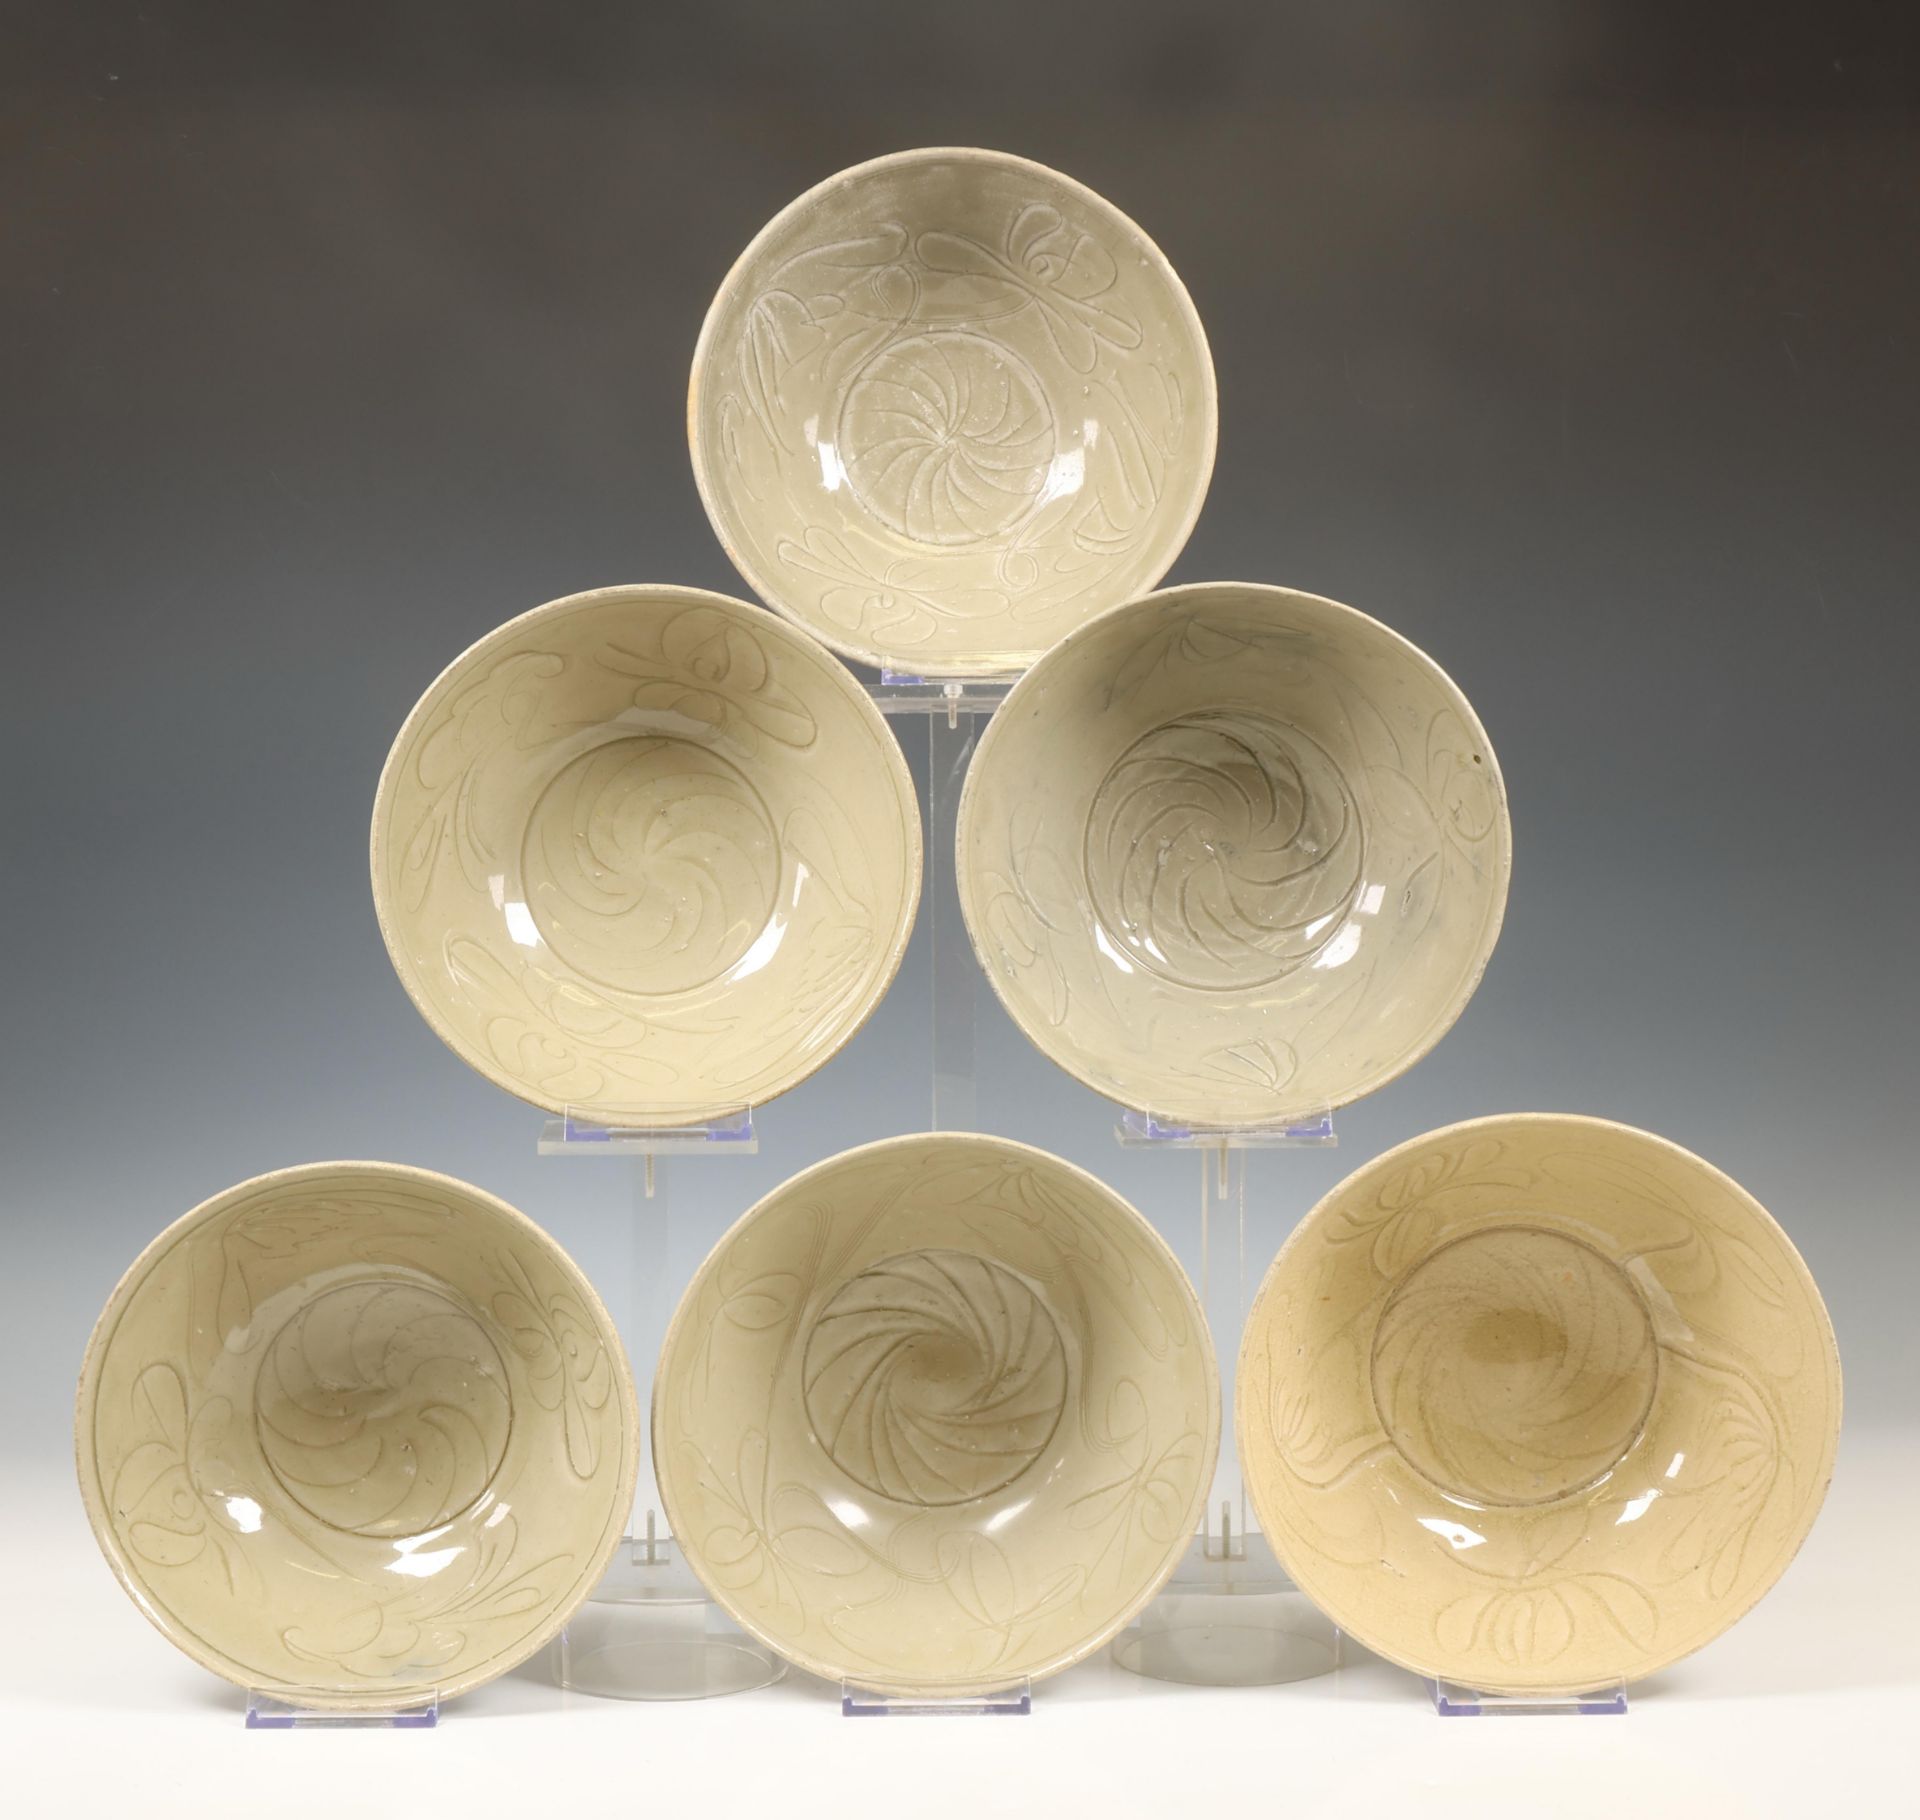 China, collection of six celadon-glazed bowls, Northern Song dynasty, 10th-12th century,